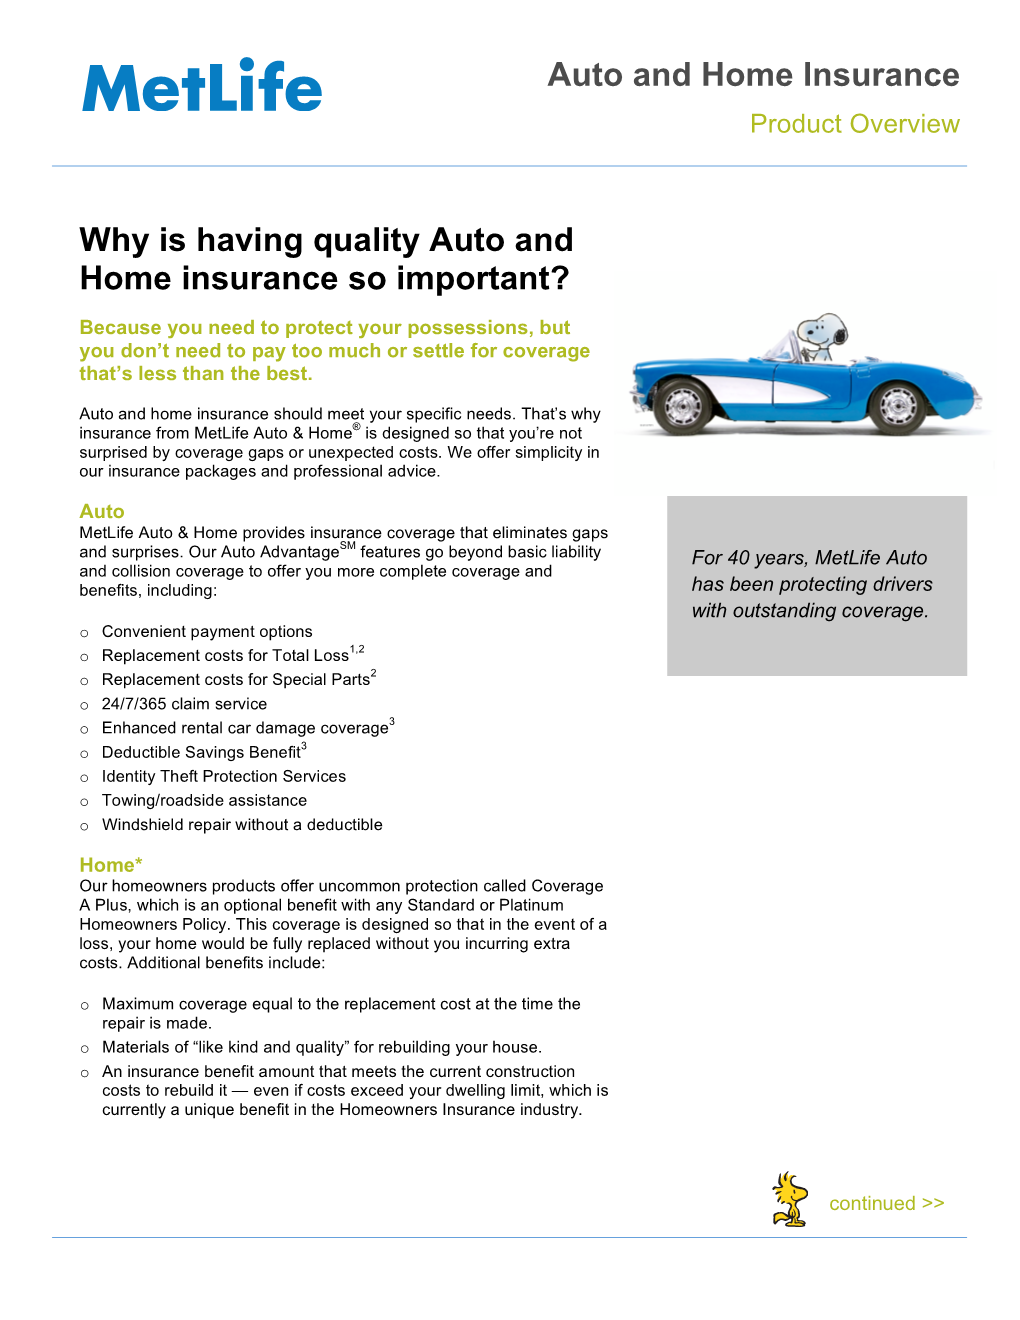 Why Is Having Quality Auto and Home Insurance So Important?